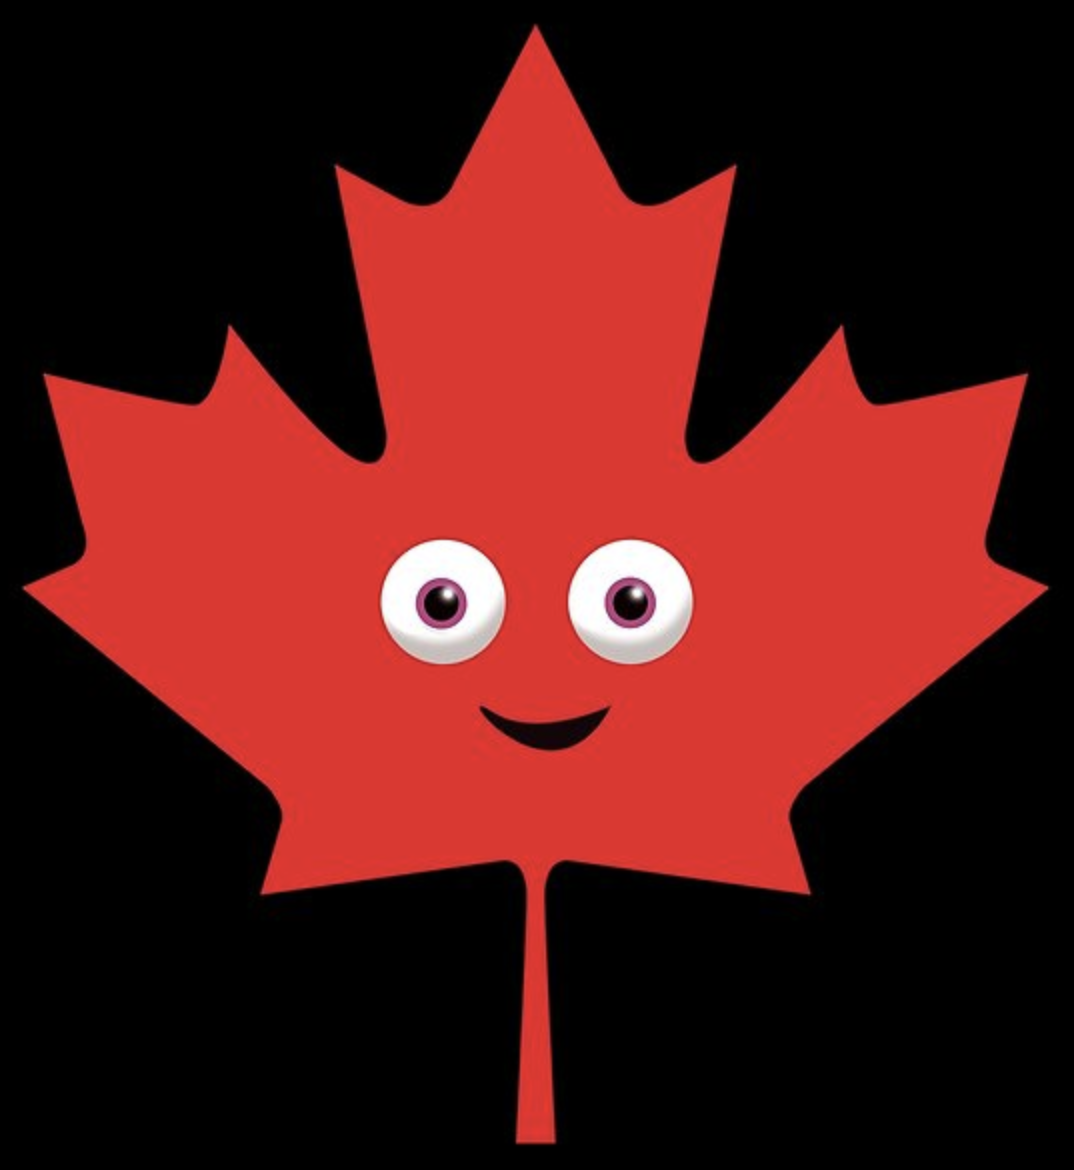 Canadian HAPPY MAPLE LEAF